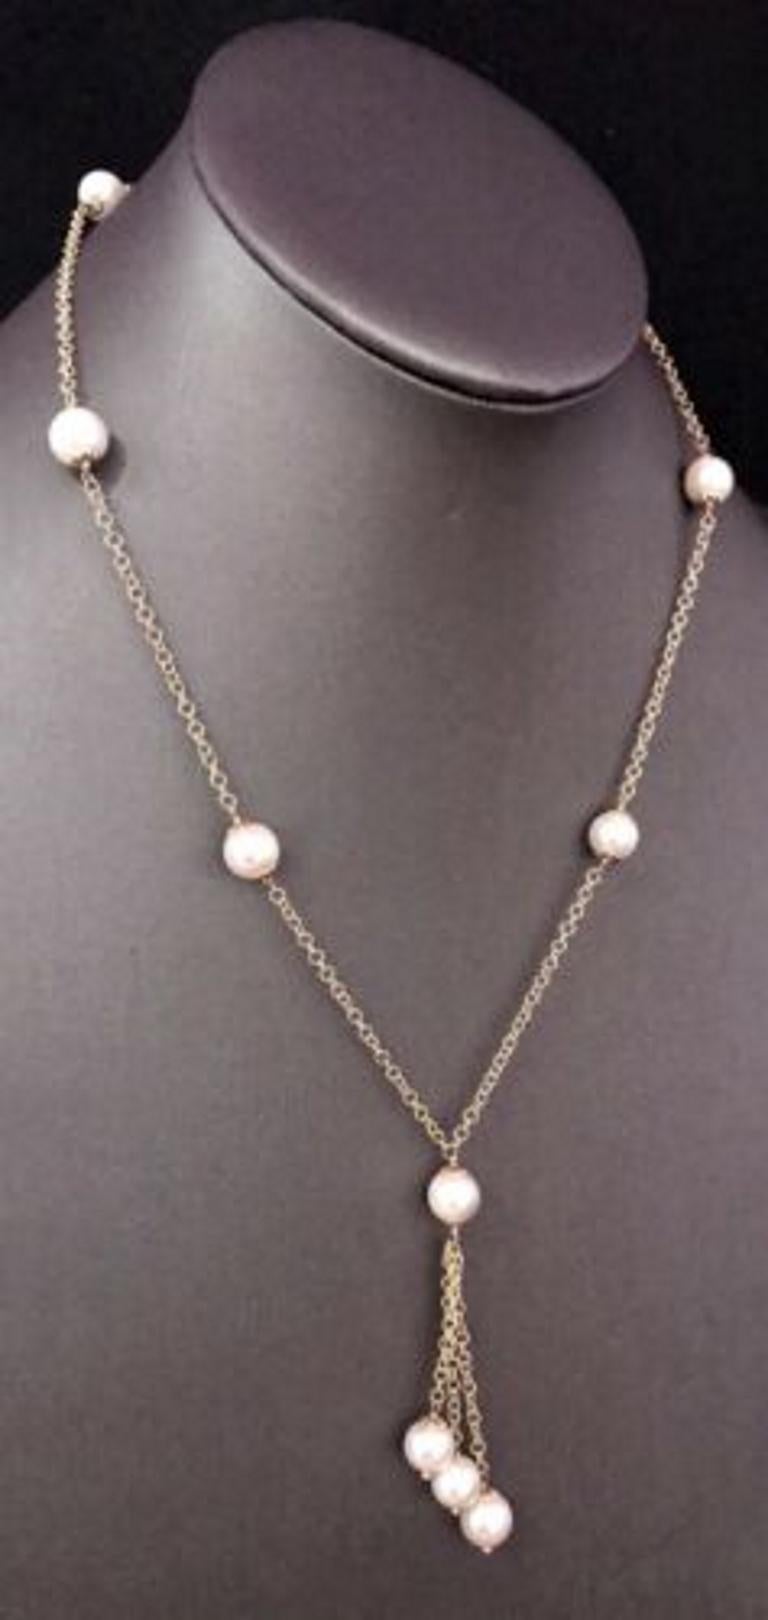 CERTIFICATE#201721470

CERTIFIED $2,950 AUTHENTIC FINE AKOYA PEARL 8.5-8 MM 18 IN 14 KT LADIES NECKLACE

This beautiful necklace listed is a Certified Authentic Fine Akoya Saltwater Pearl necklace made with luxurious 14KT Solid Gold.

This exquisite